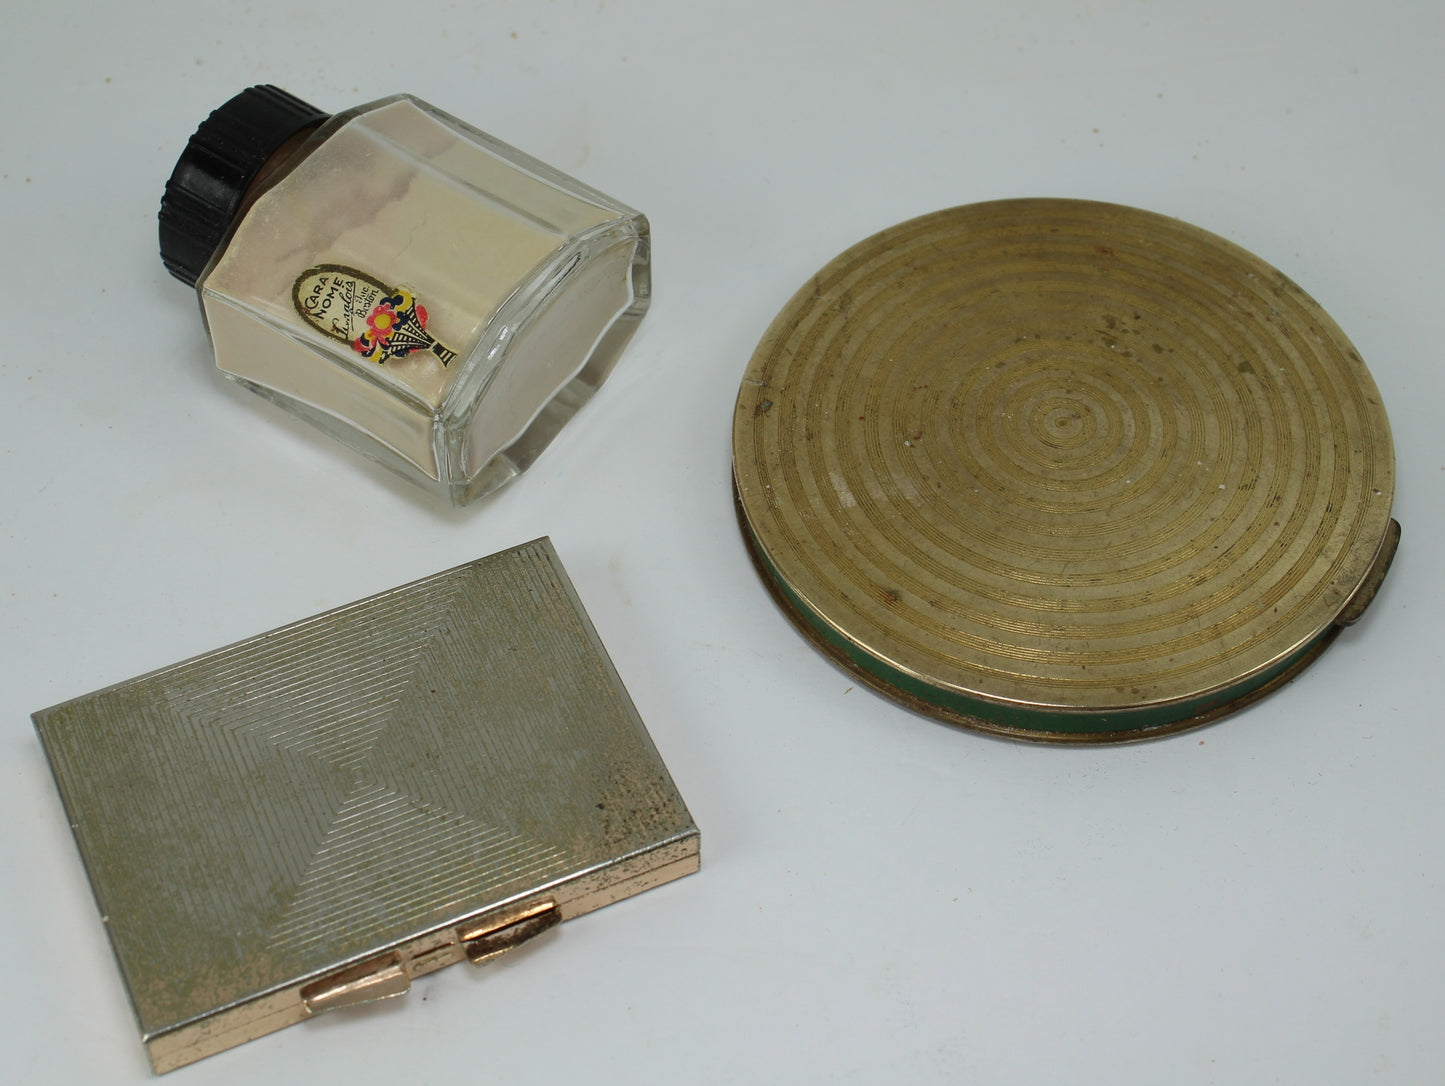 Collection Vintage 10 Vanity Compact Powder Jars Pill Boxes Mid Century & 1940s green enamel compact leaves